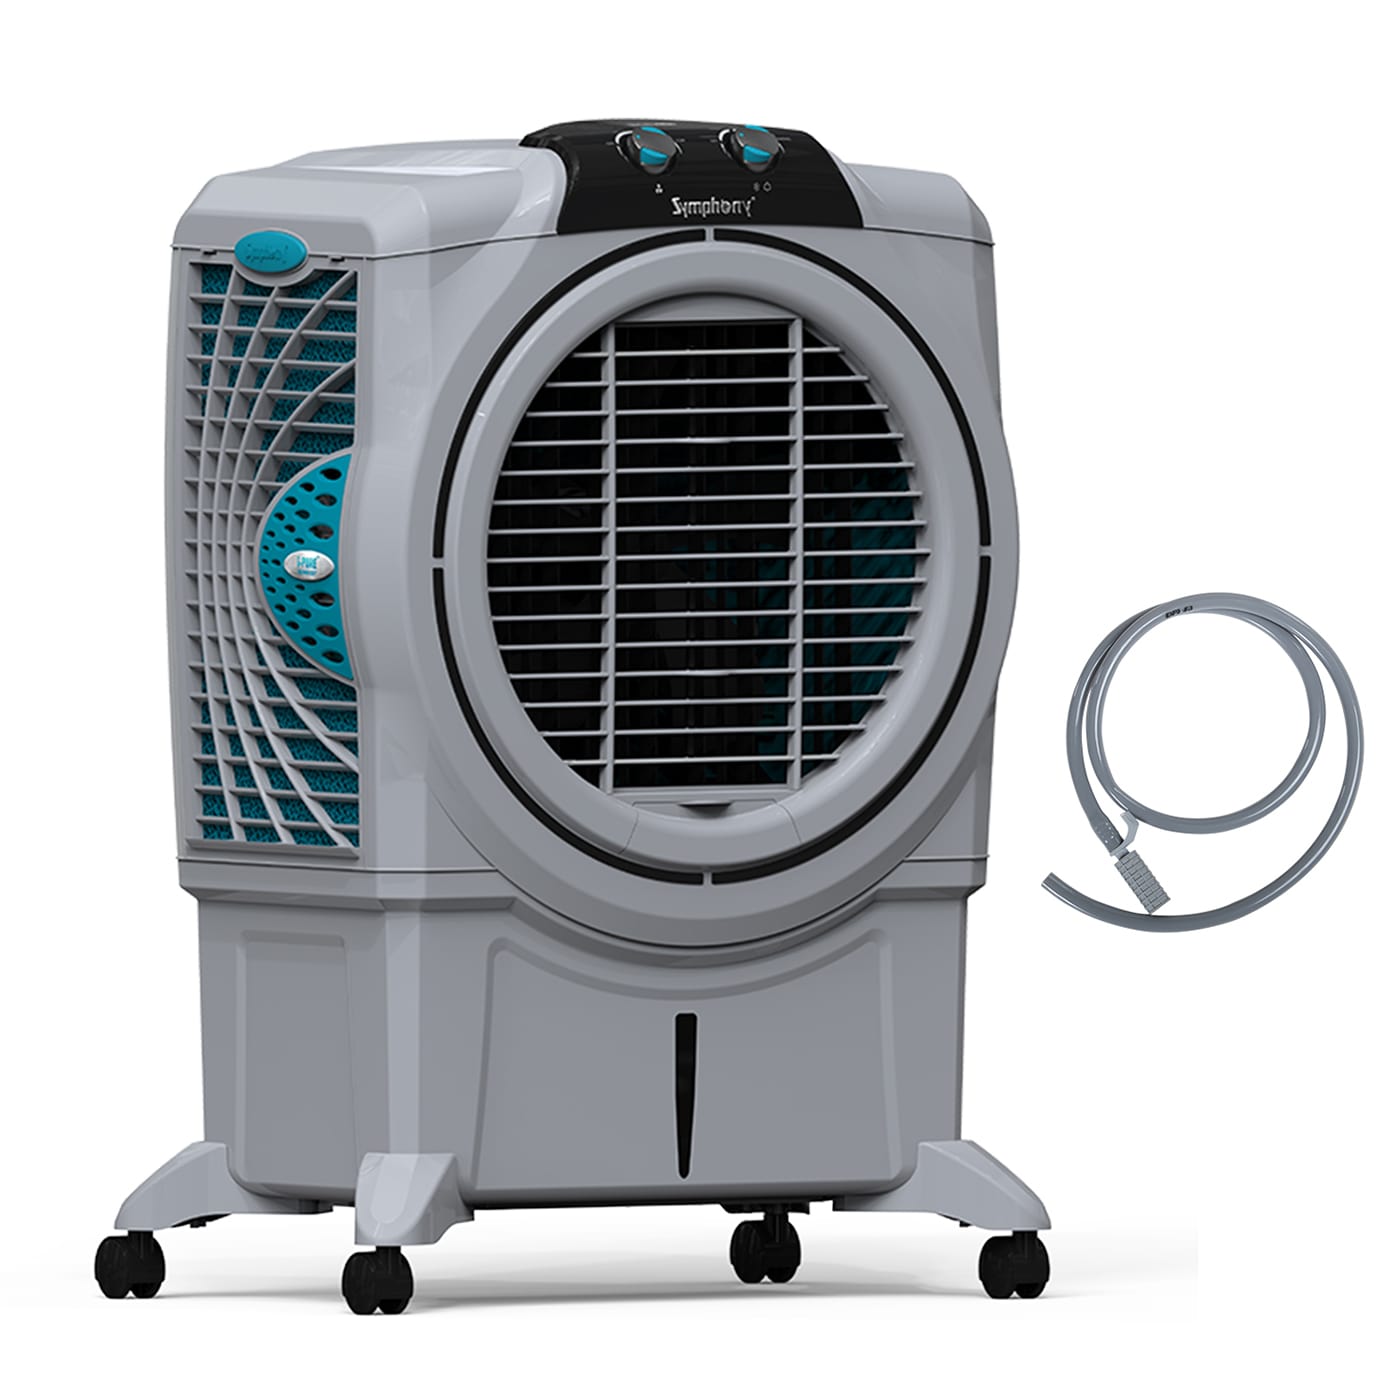 Affordable 75-litre air coolers